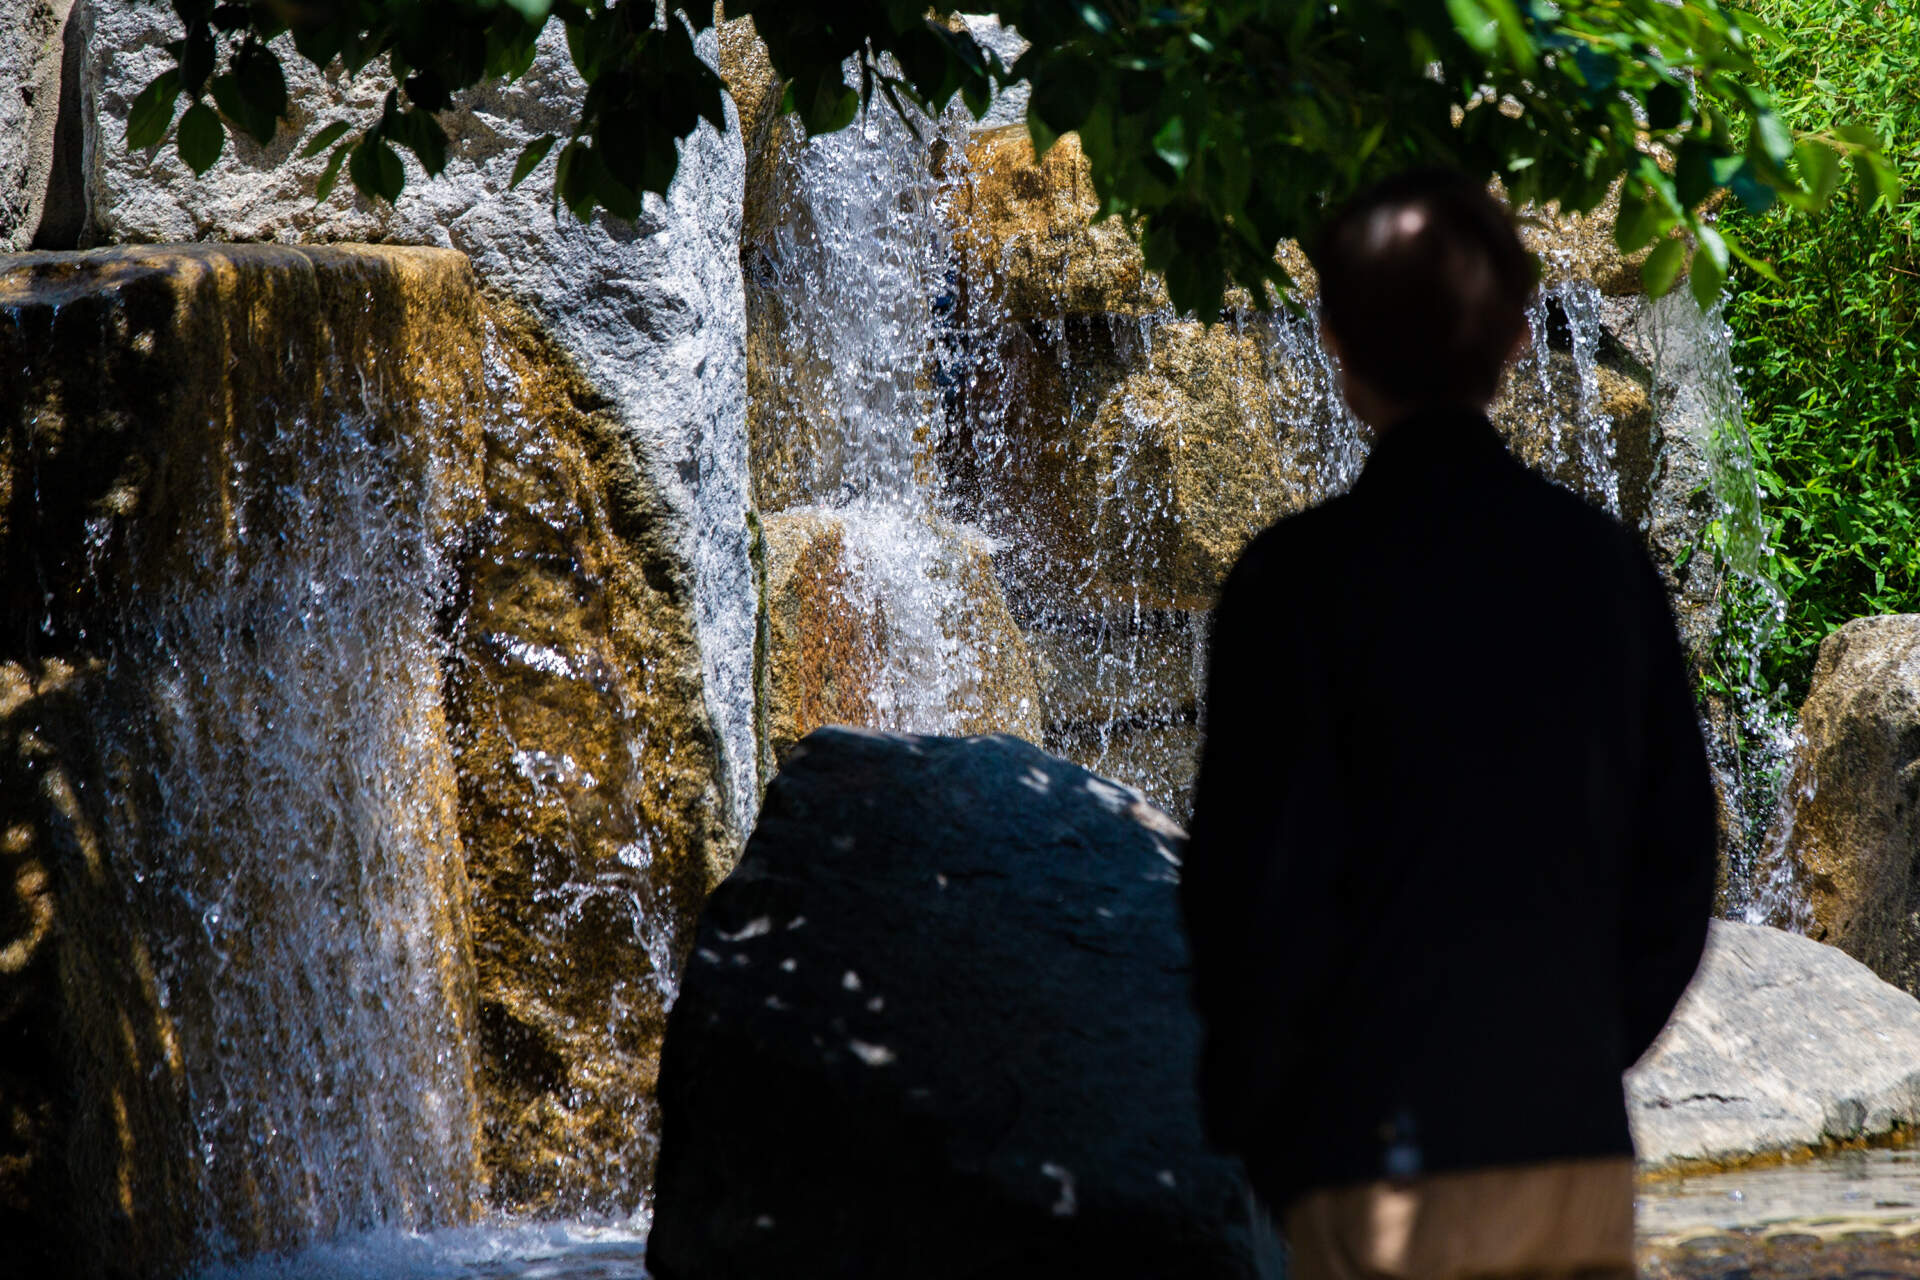 A man stands and watches the waterfall in Chinatown Park on the Rose Kennedy Greenway. (Jesse Costa/WBUR)